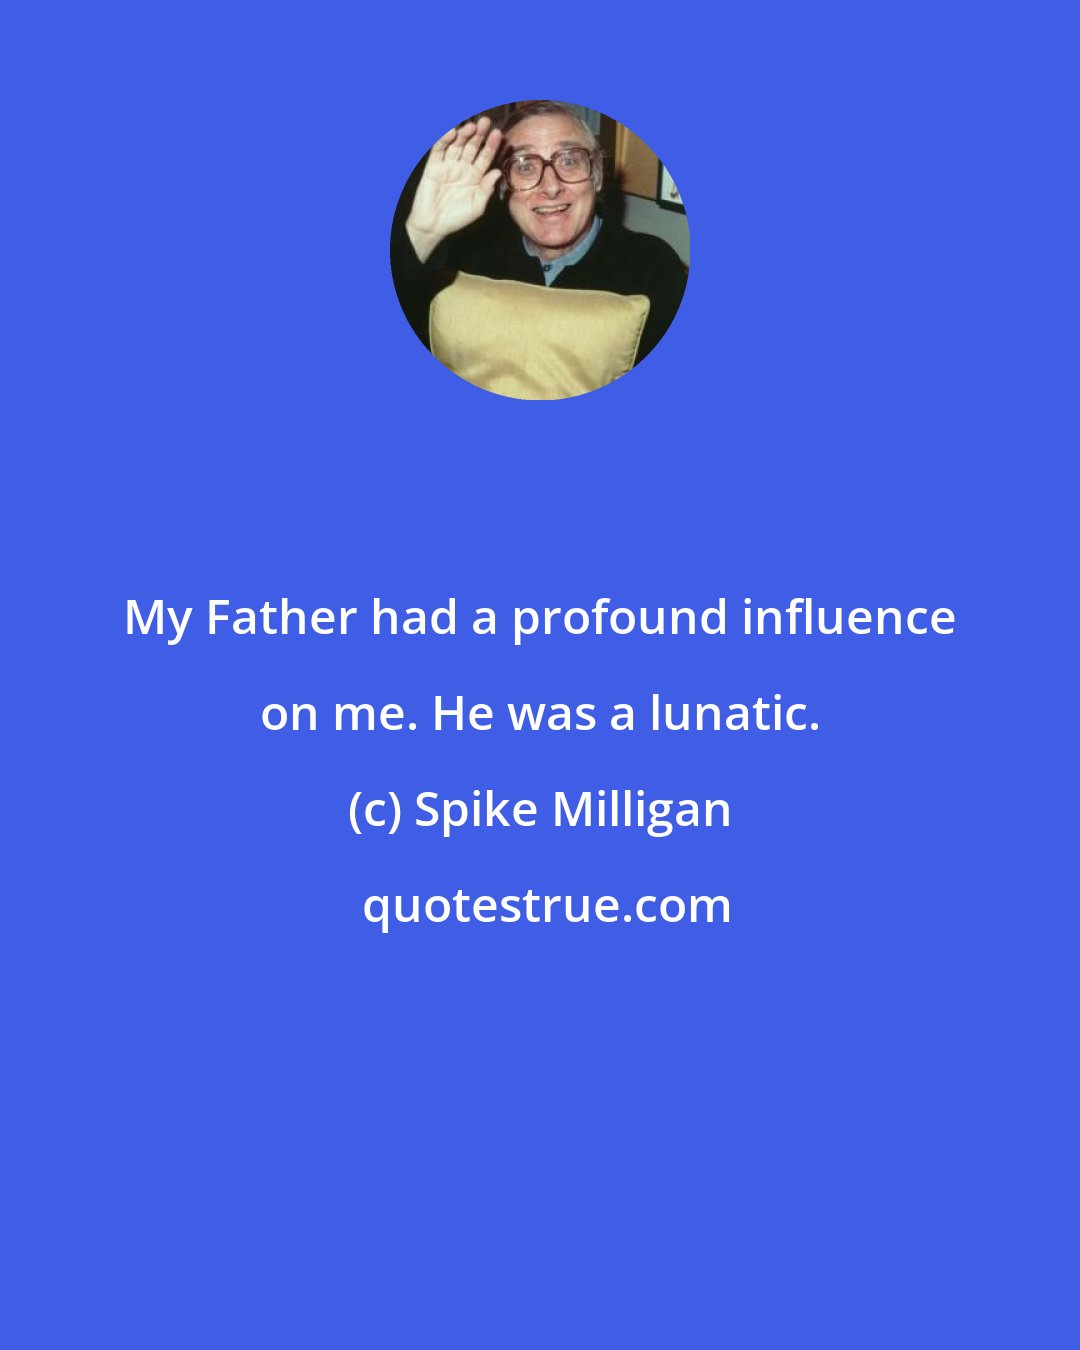 Spike Milligan: My Father had a profound influence on me. He was a lunatic.